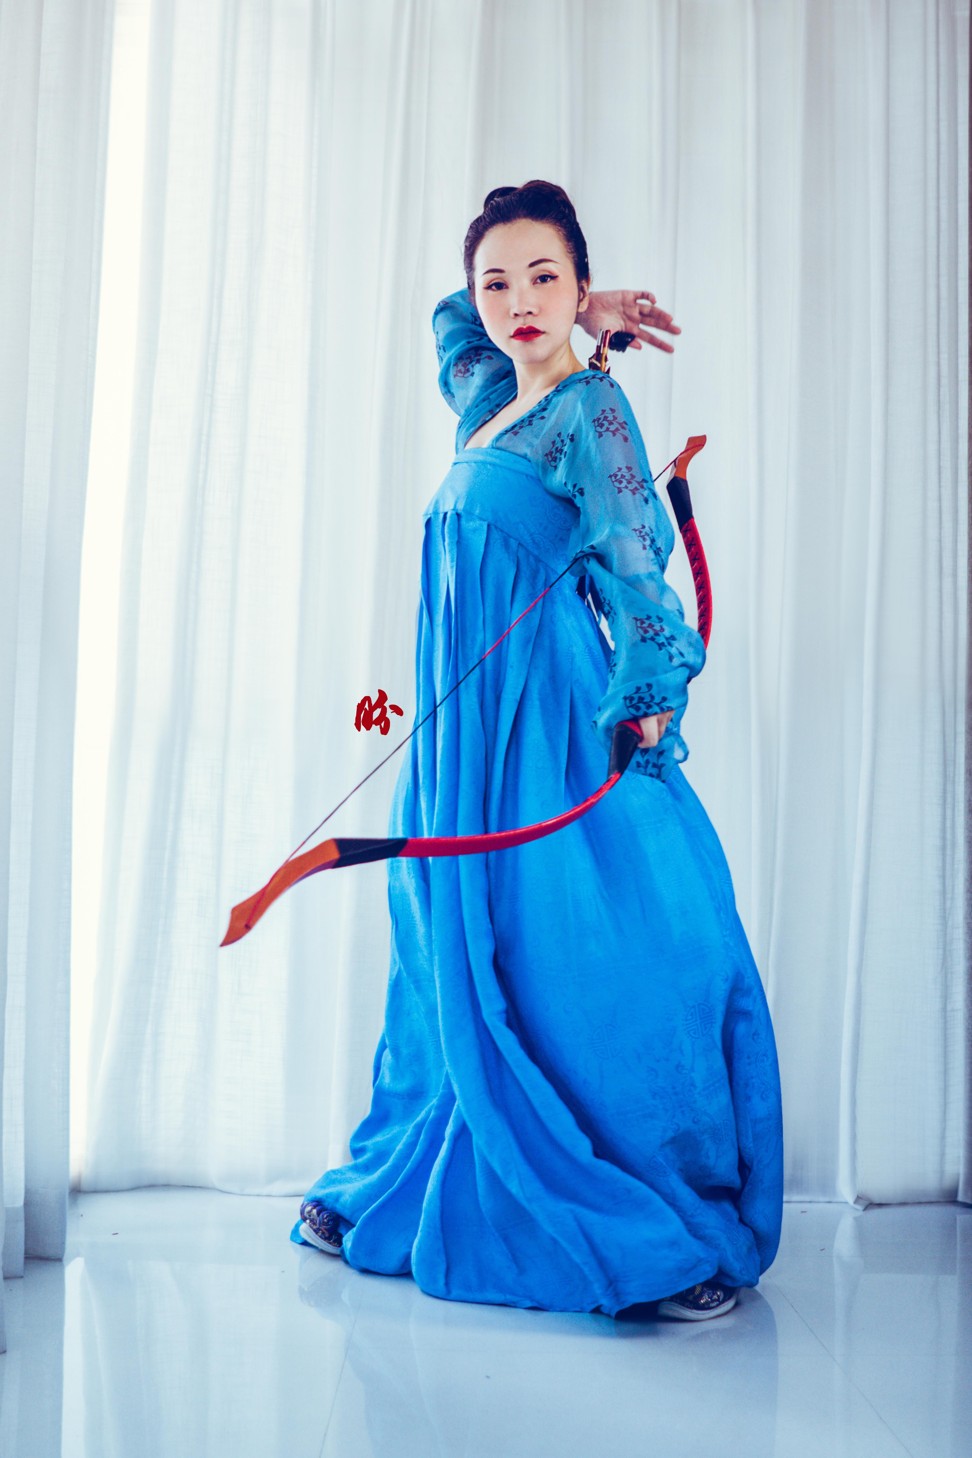 Gong in the style of a Chinese Wonder Woman. Photo: Hanfugirls Collective